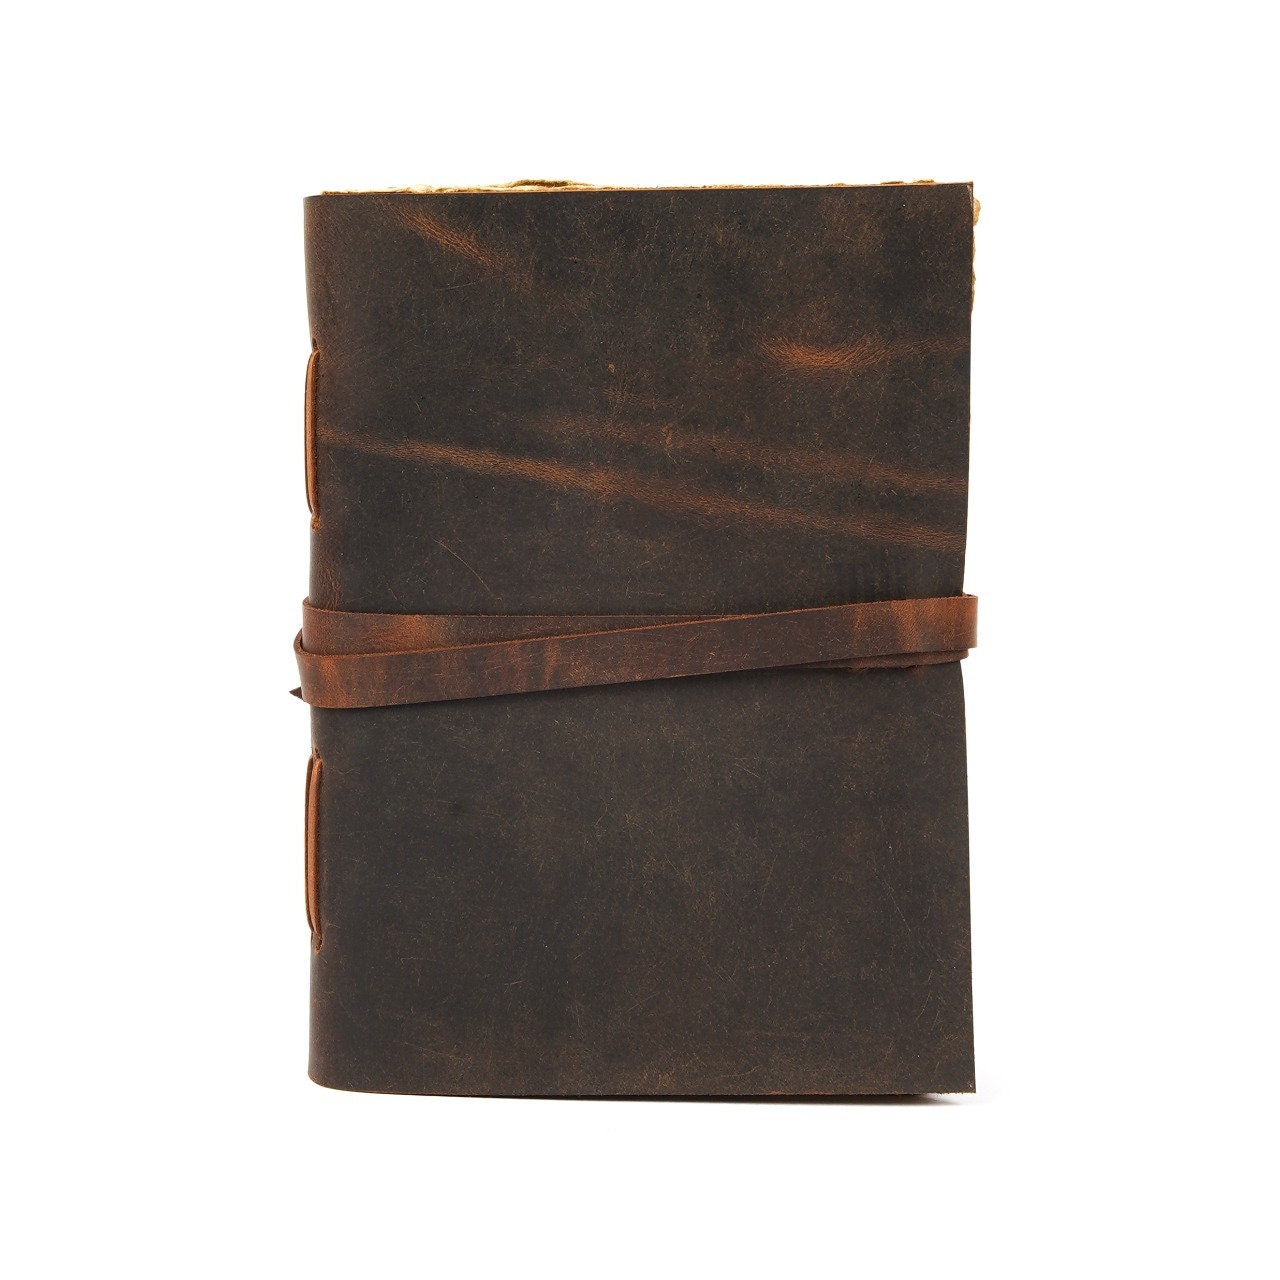 A4 Vintage Leather Journal Recycled Paper Journal, For Notes, Notebook, Sketch book, Diary, Handmade Book,100% Recycled Rag,Tree Free Paper